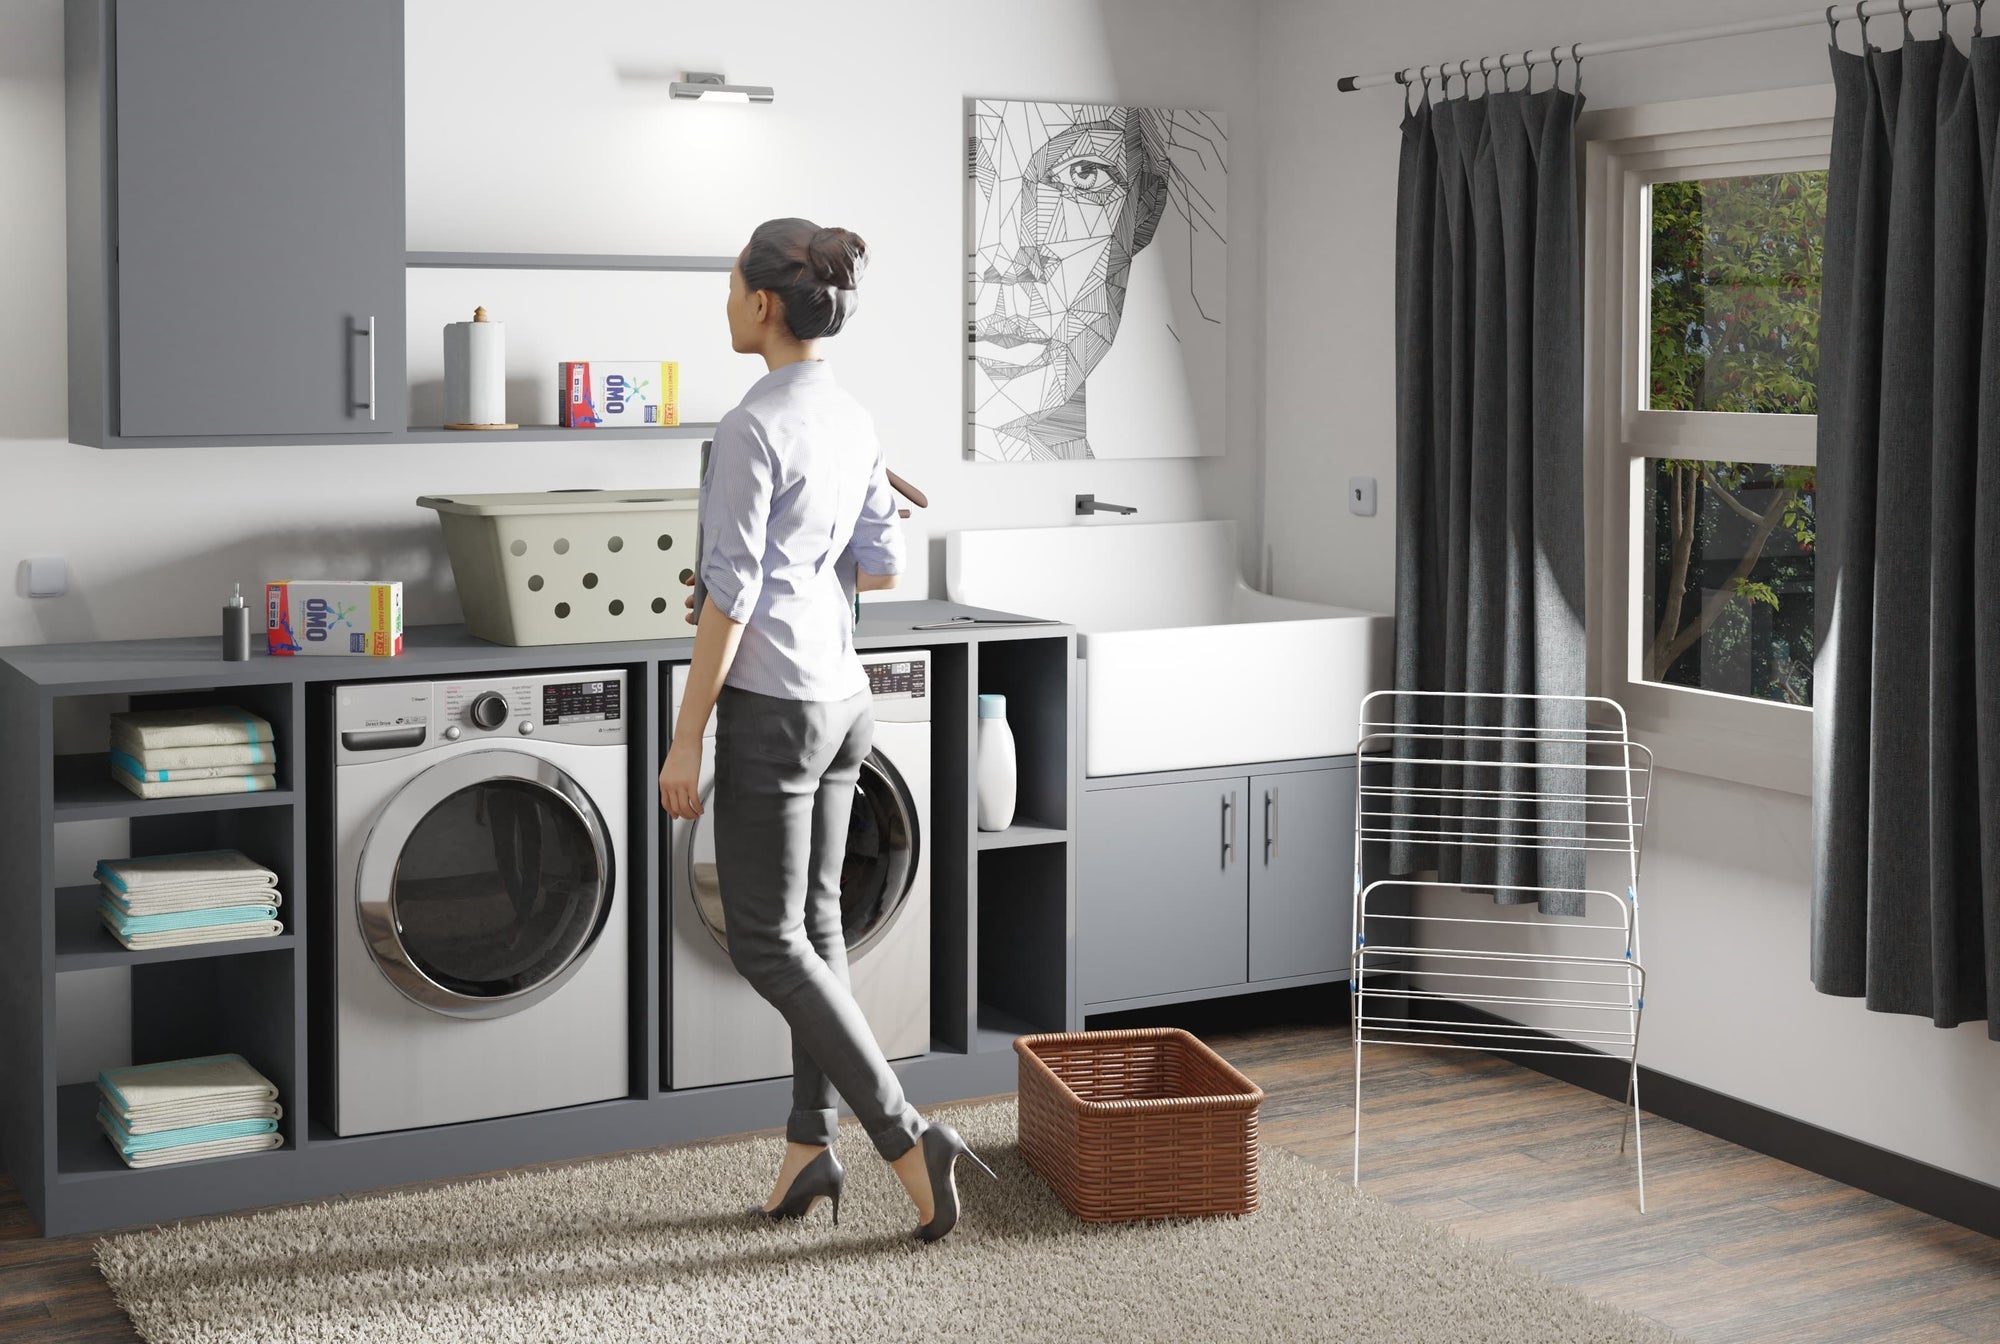 How to Decorate Your Laundry Room: a blog with tips and ideas for decorating your laundry room.